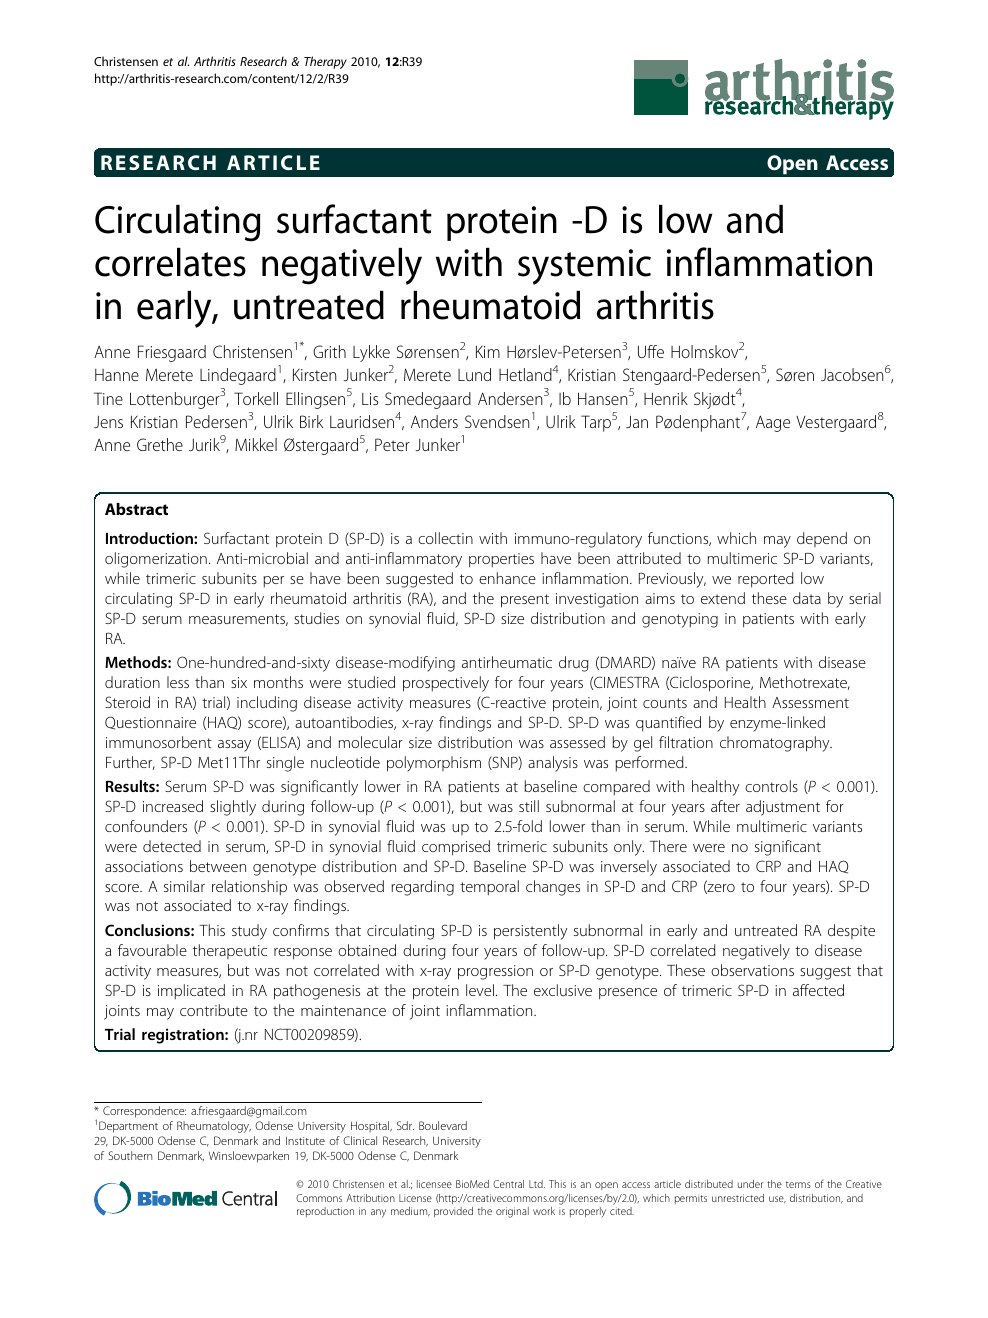 Circulating surfactant protein -D is low and correlates negatively with systemic inflammation early, rheumatoid arthritis – topic of research paper in Clinical medicine. Download scholarly article PDF and read for